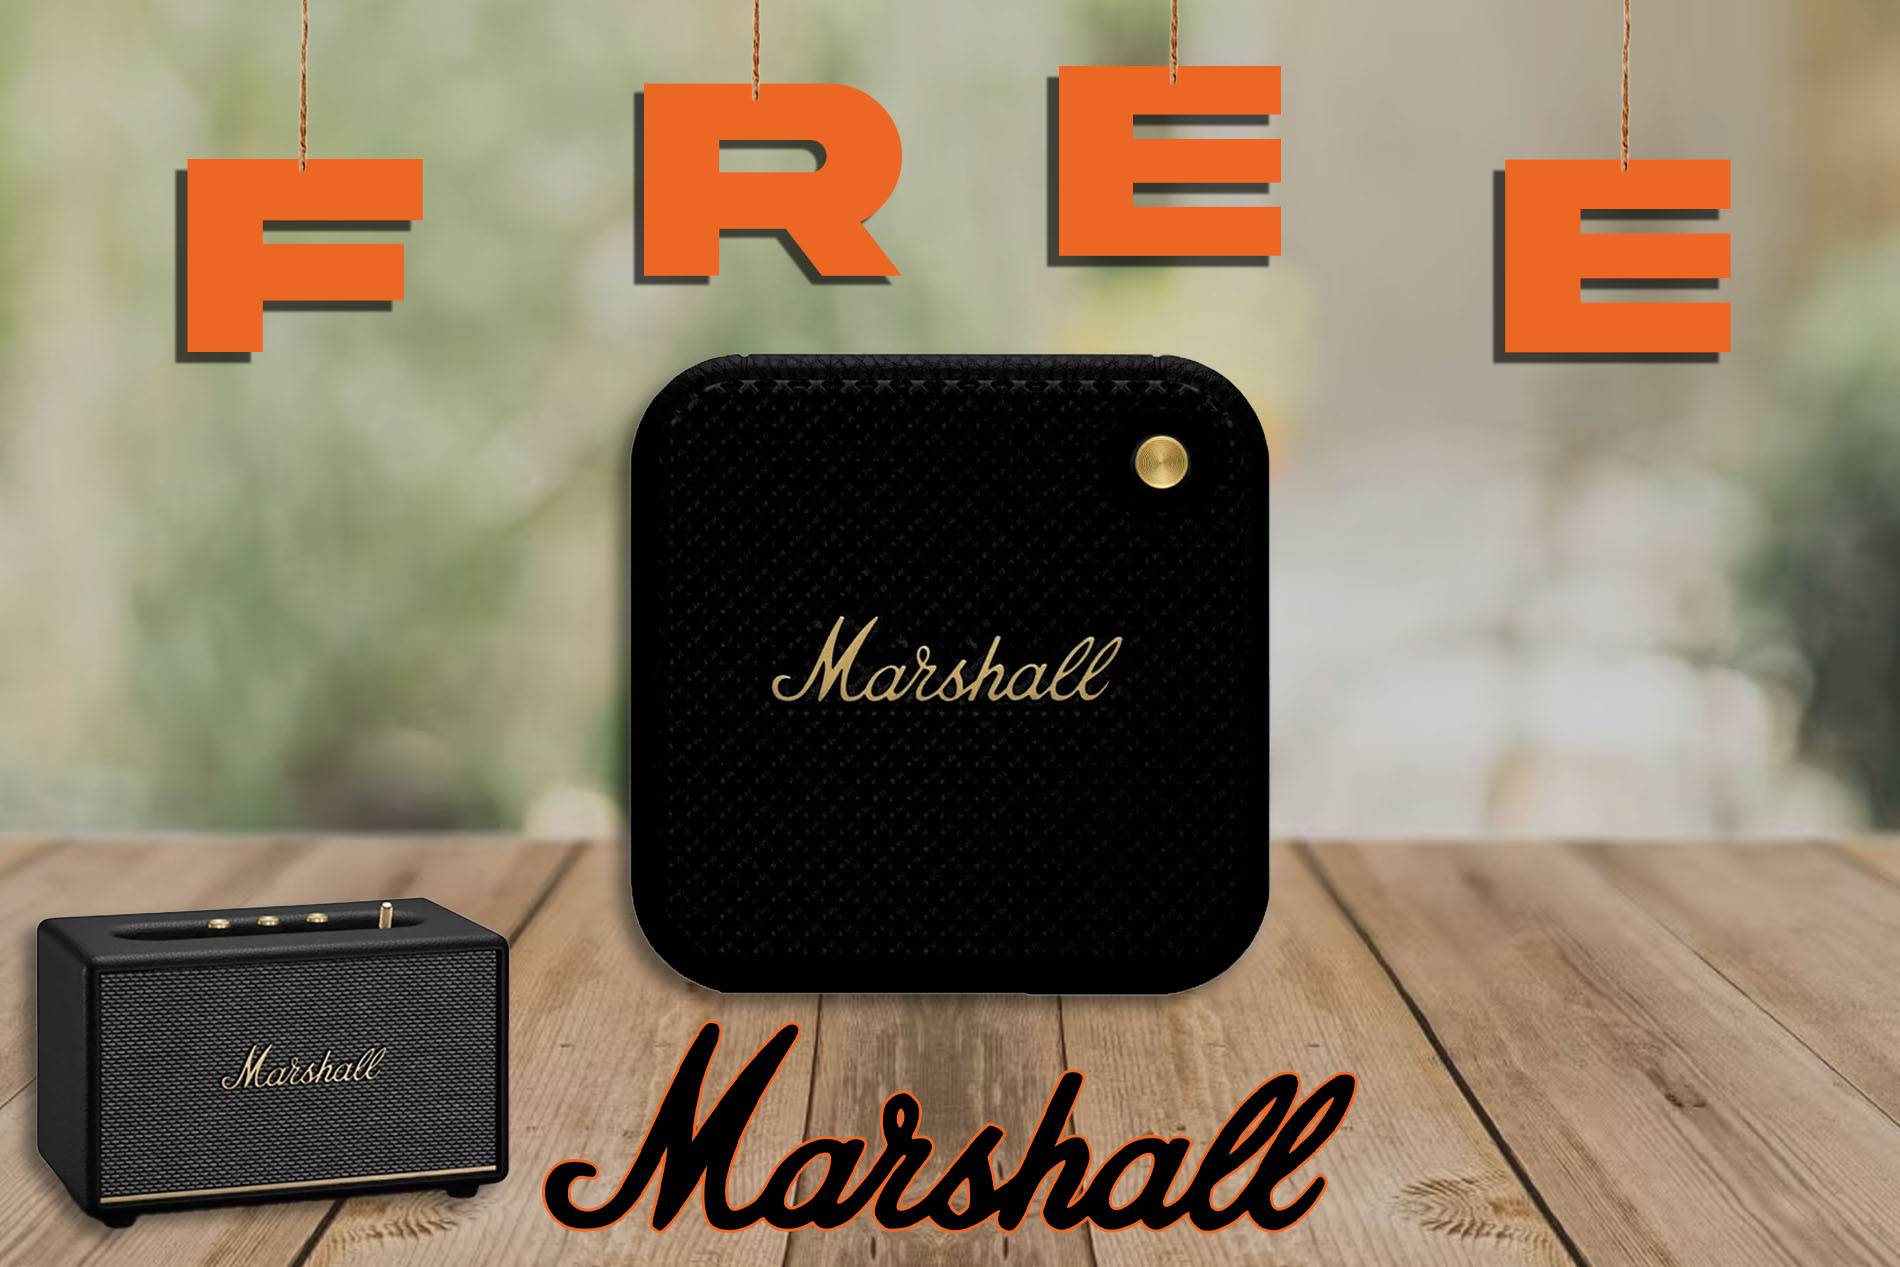 Free To Enter: Marshall Willen Bluetooth Speaker (Spend £1+ and Upgrade to Marshell Acton III Speaker)